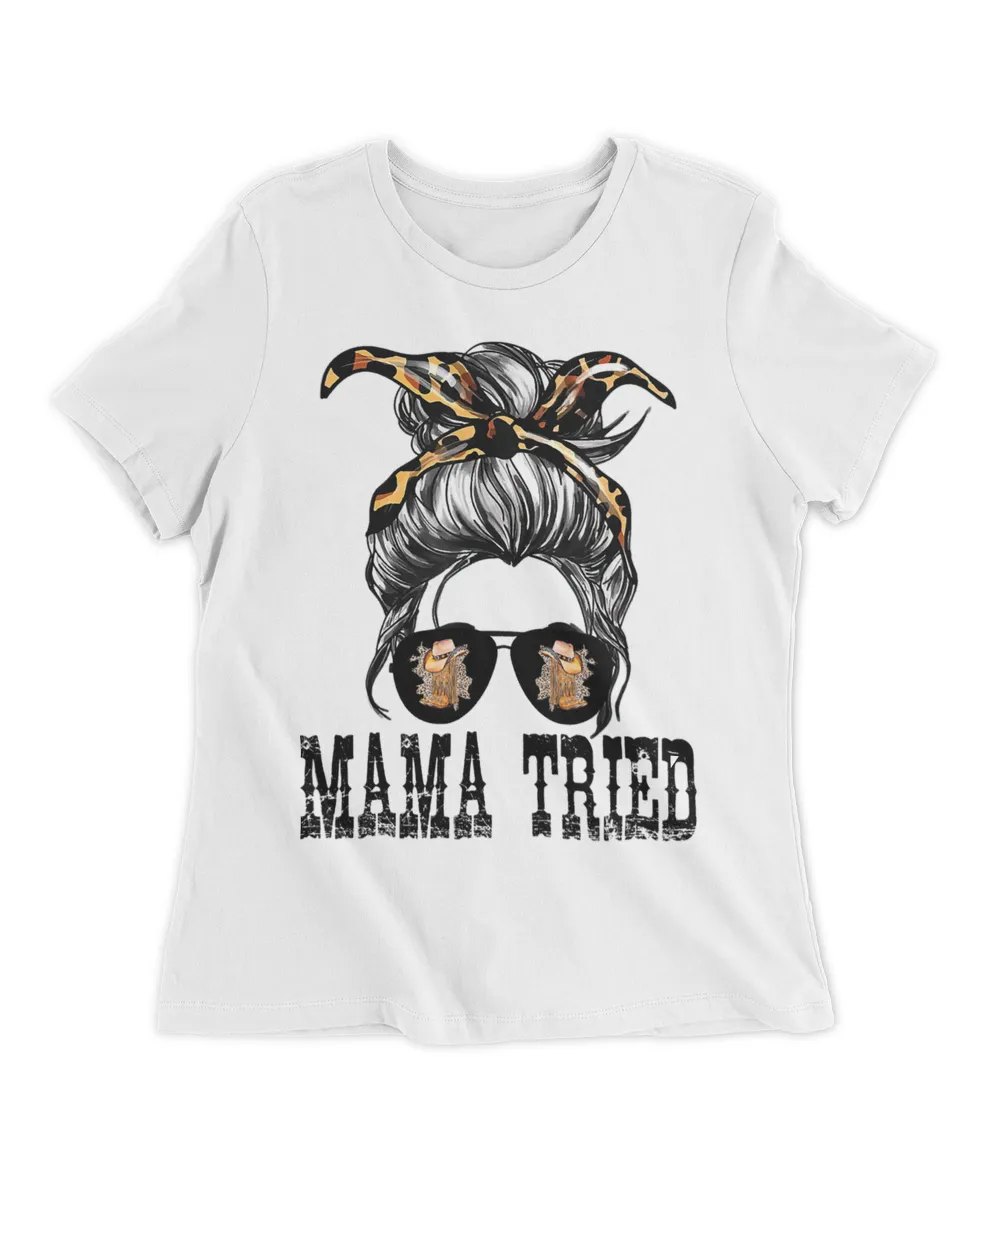 MAMA COUNTRY MUSIC LOVERS TRIED WESTERN COW GIRL MESSY BUN